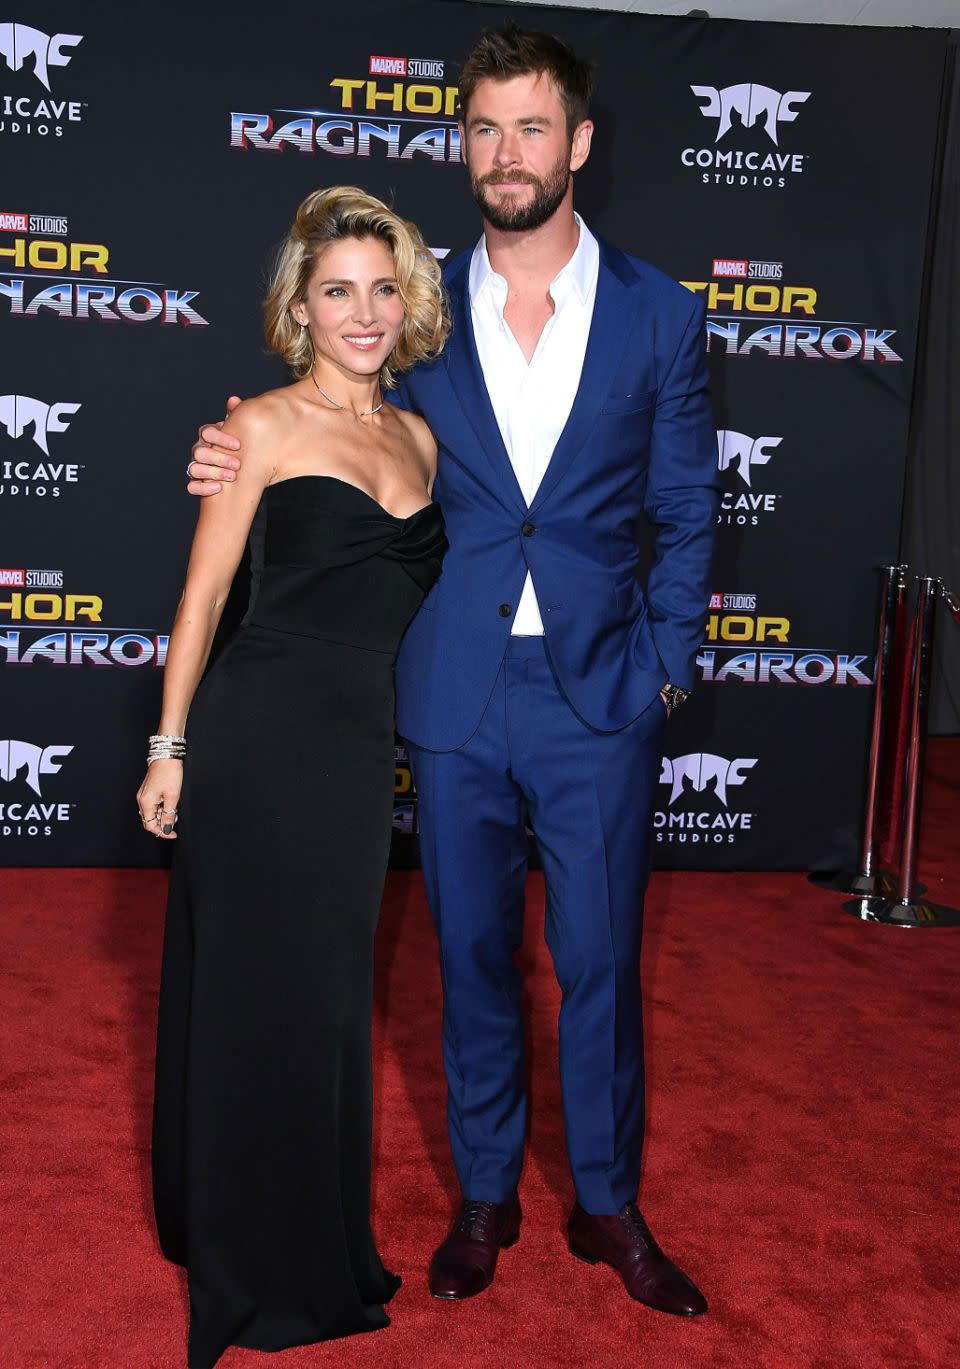 All eyes were on Chris Hemsworth and wife Elsa Pataky at the Thor: Ragnarok in Los Angeles on Tuesday night. Source: Getty